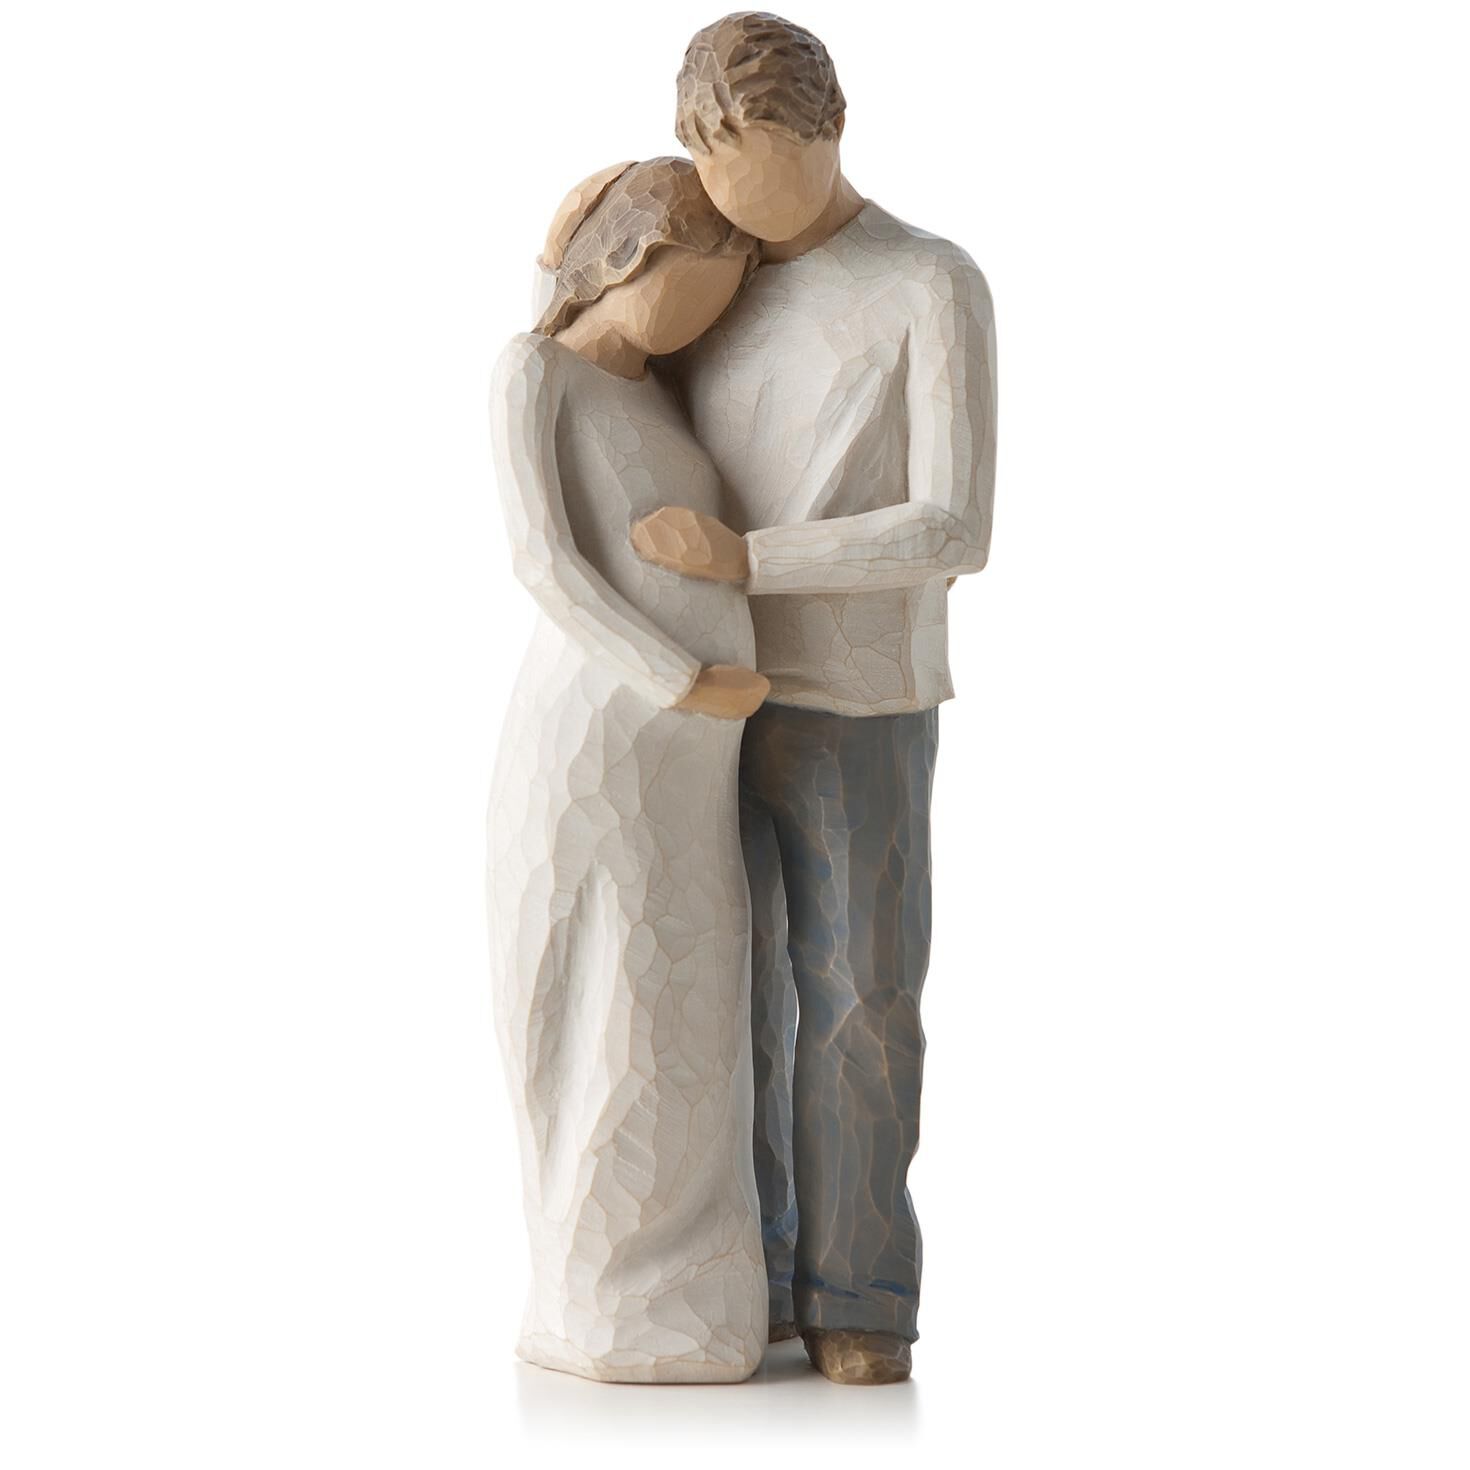 Willow Tree Home Figurine Expectant Mother & Father 26252 in a Branded Gift Box 